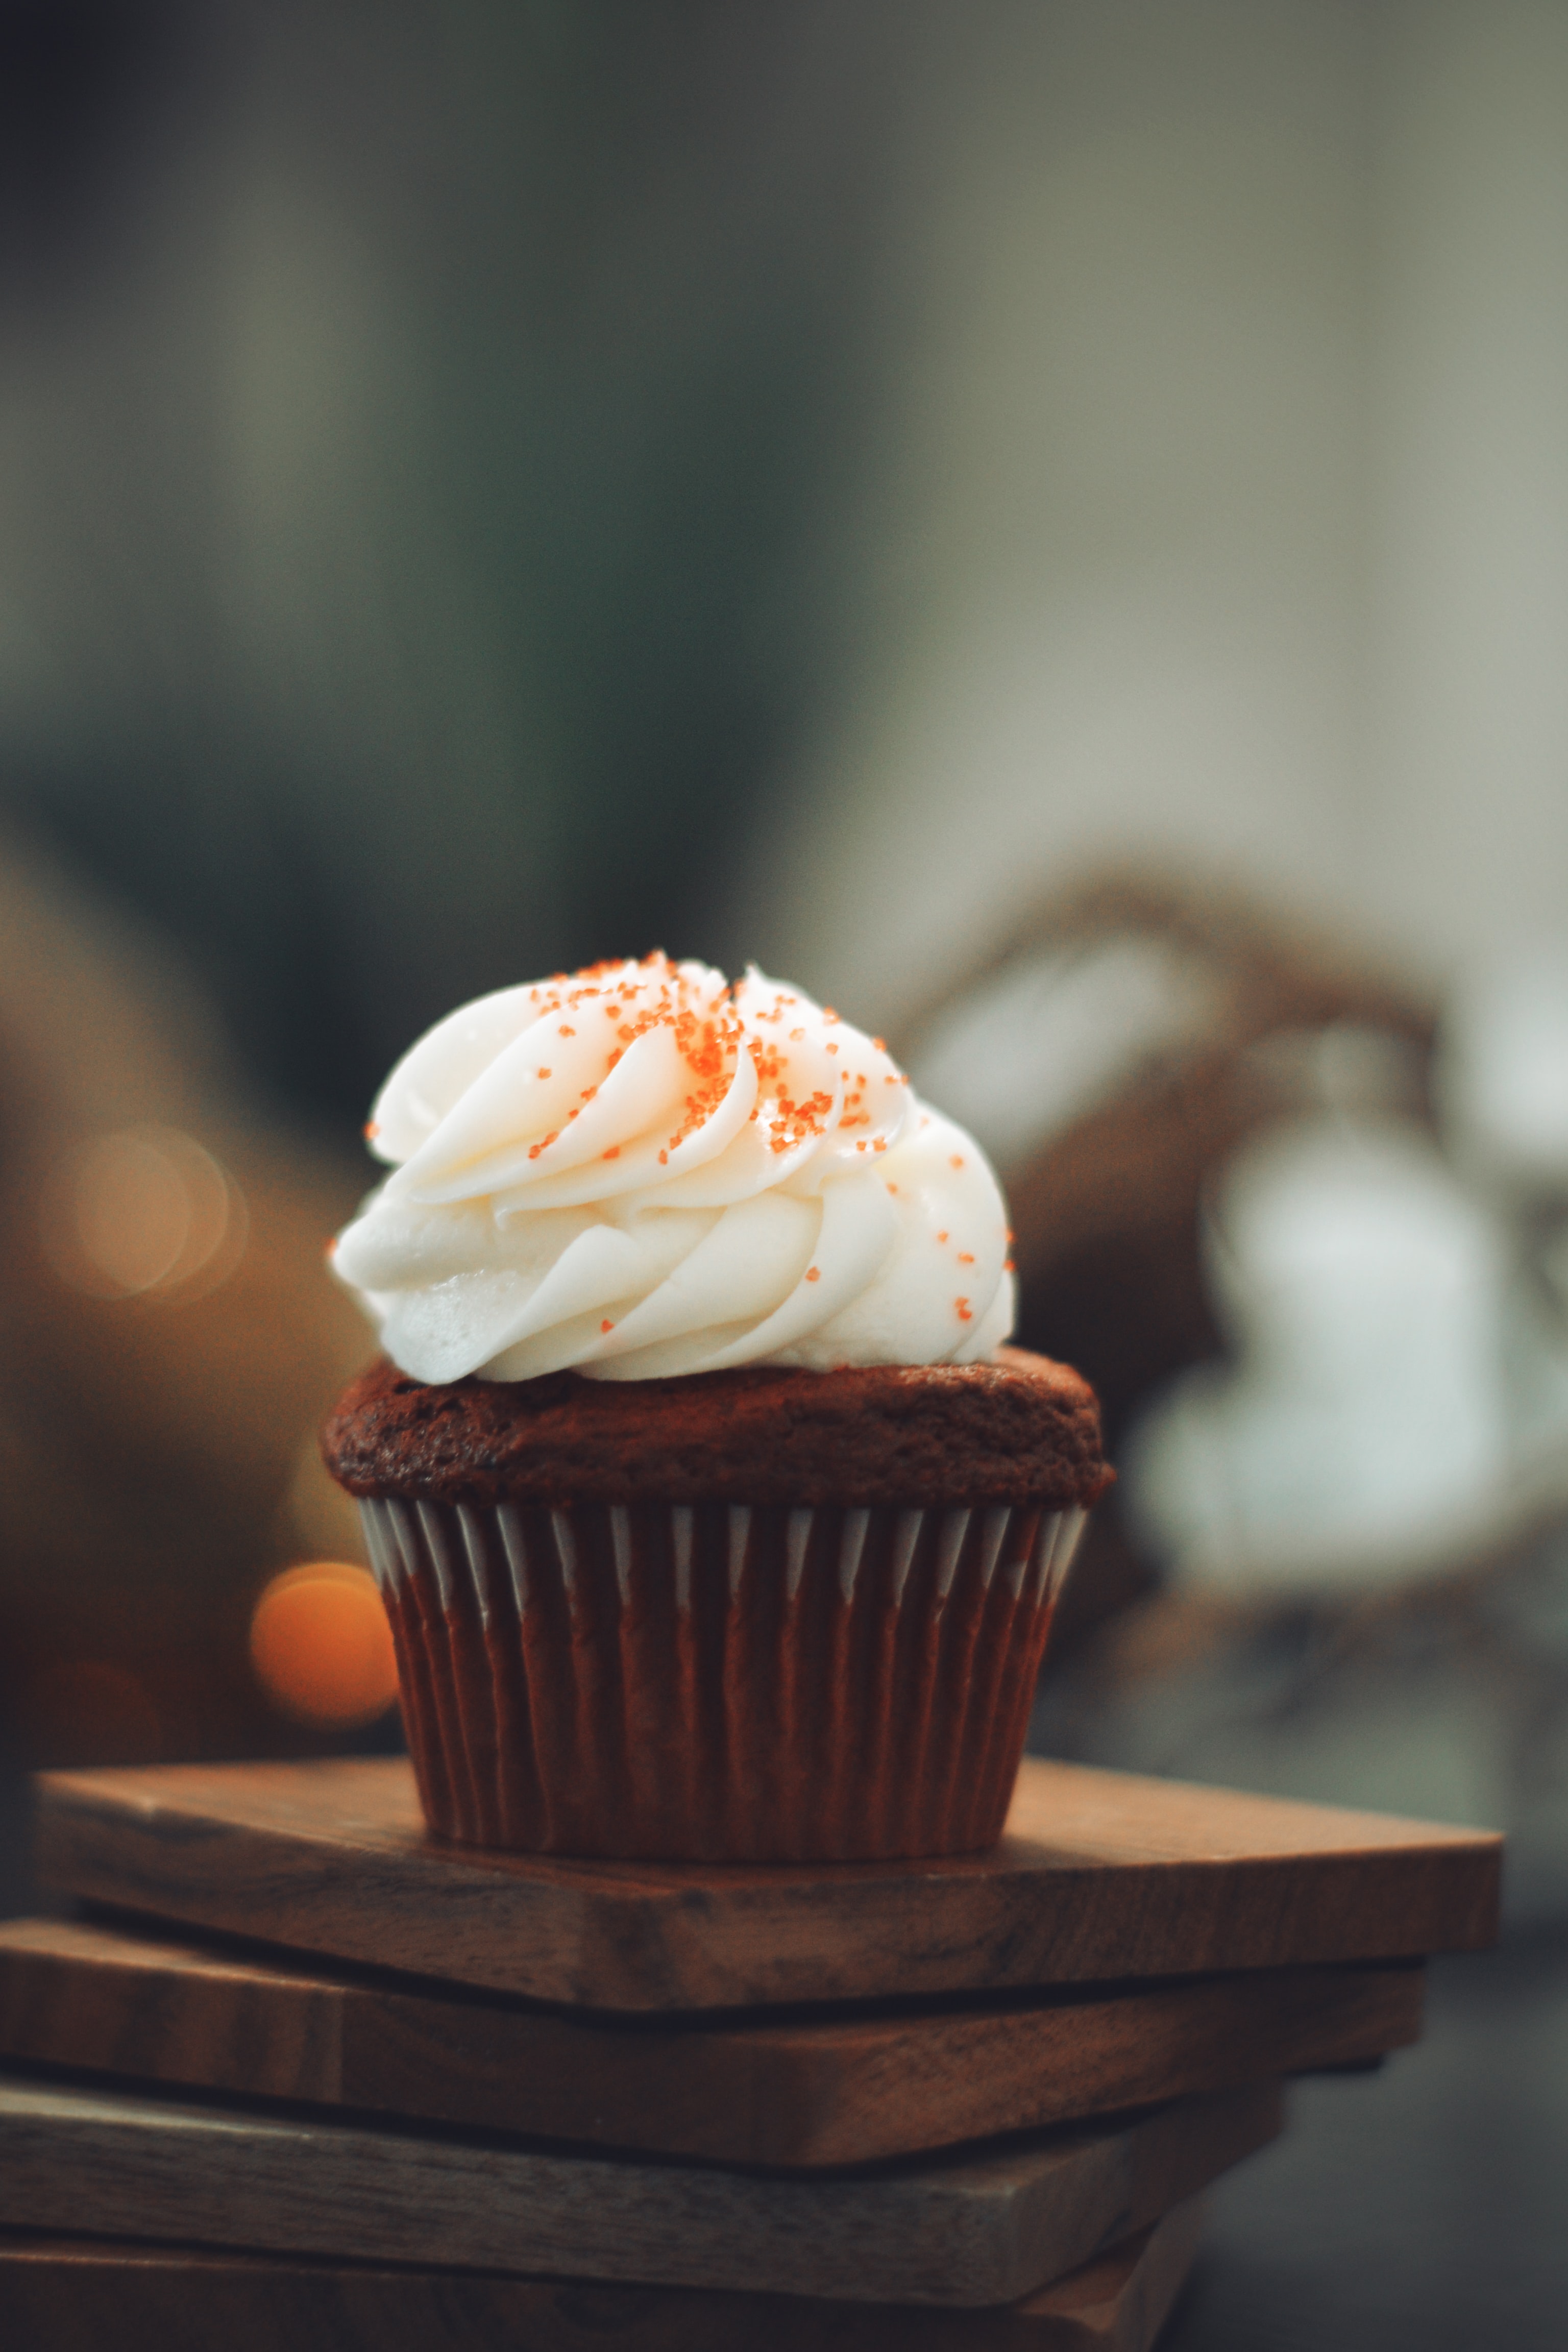 baking, desert, food, sweet, bakery products, cupcake, cooking, cookery HD wallpaper